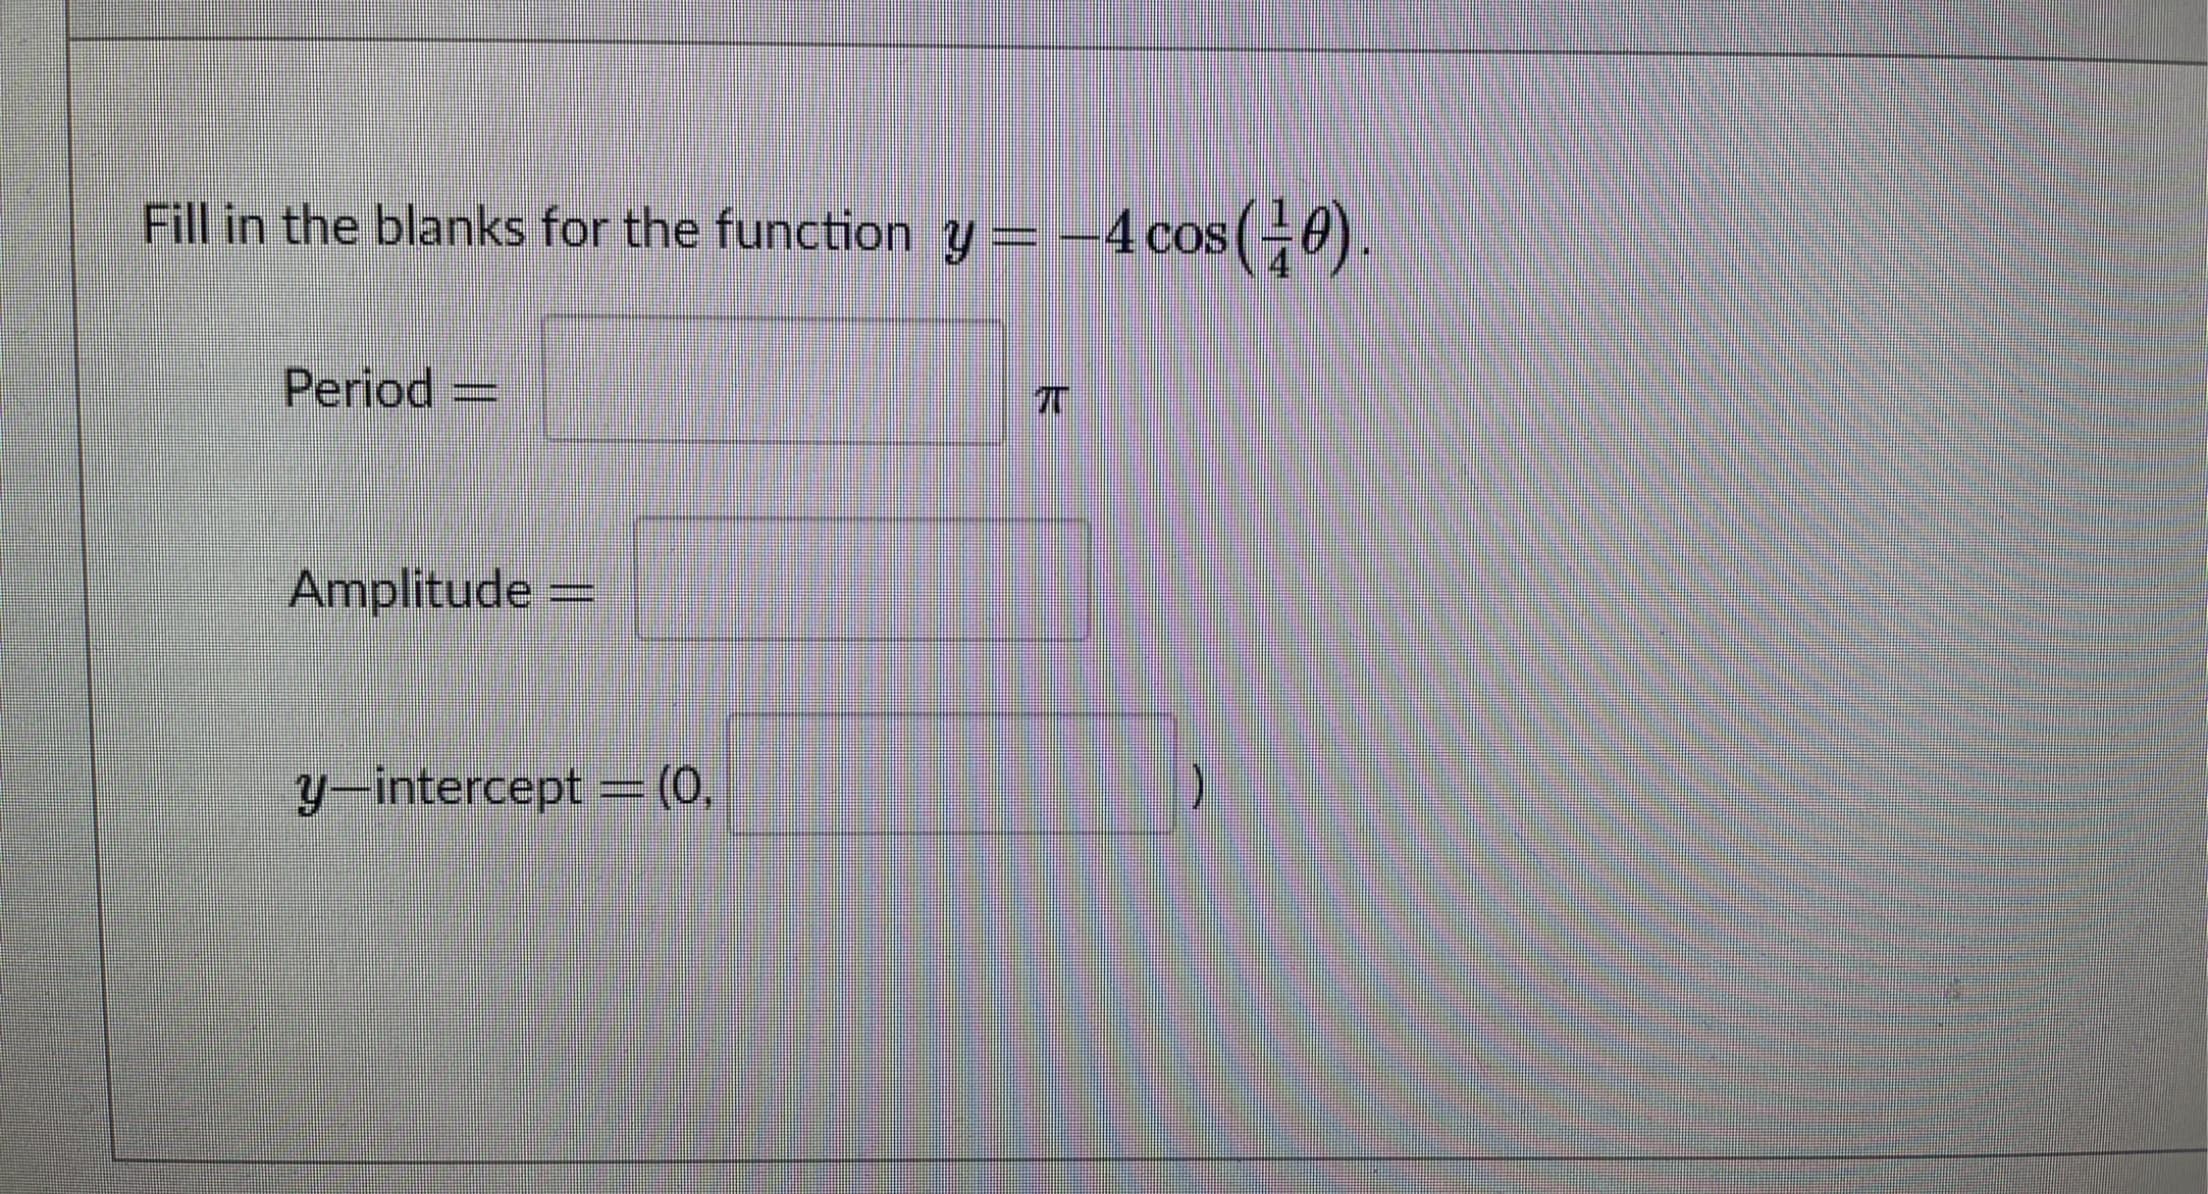 Fill in the blanks for the function y =-4 cos(-0).
Period =
Amplitude
y-intercept = (0.
